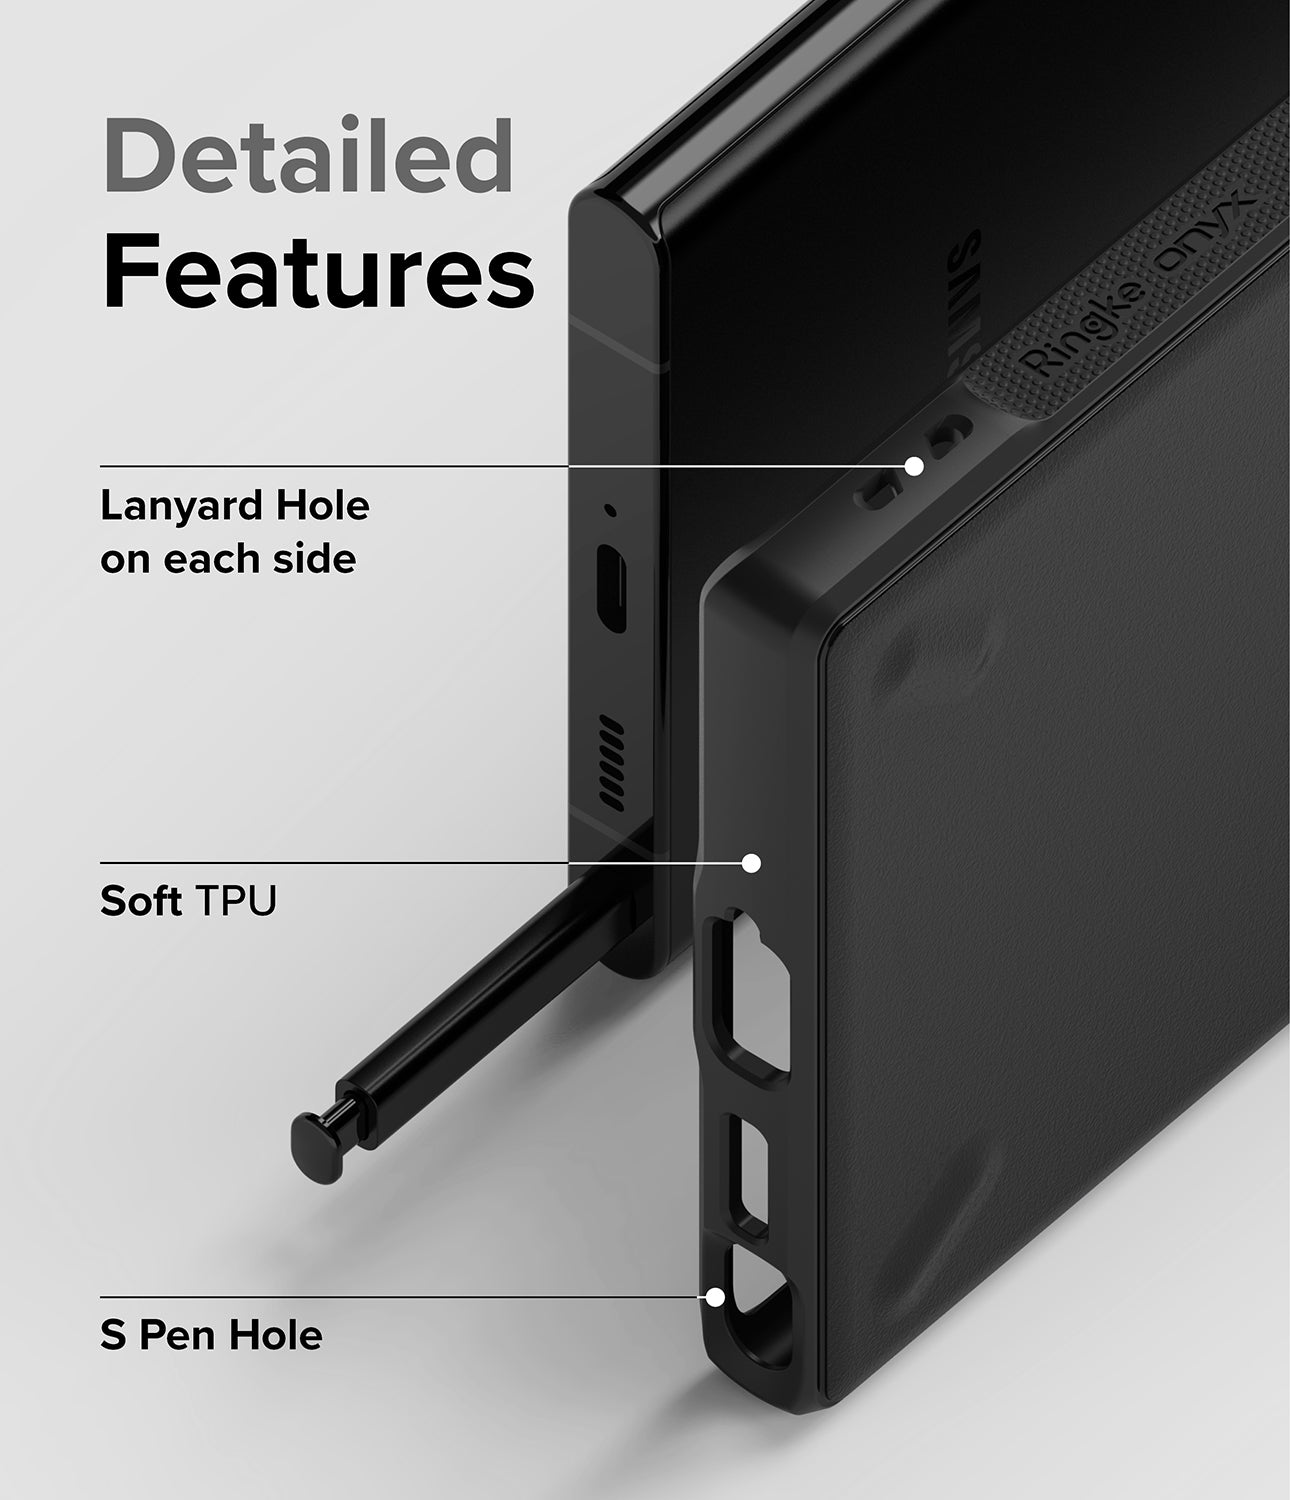 Galaxy S22 Ultra Case | Onyx - Black - Detailed Features. Lanyard Hole on each side. Soft TPU. S Pen Hole.